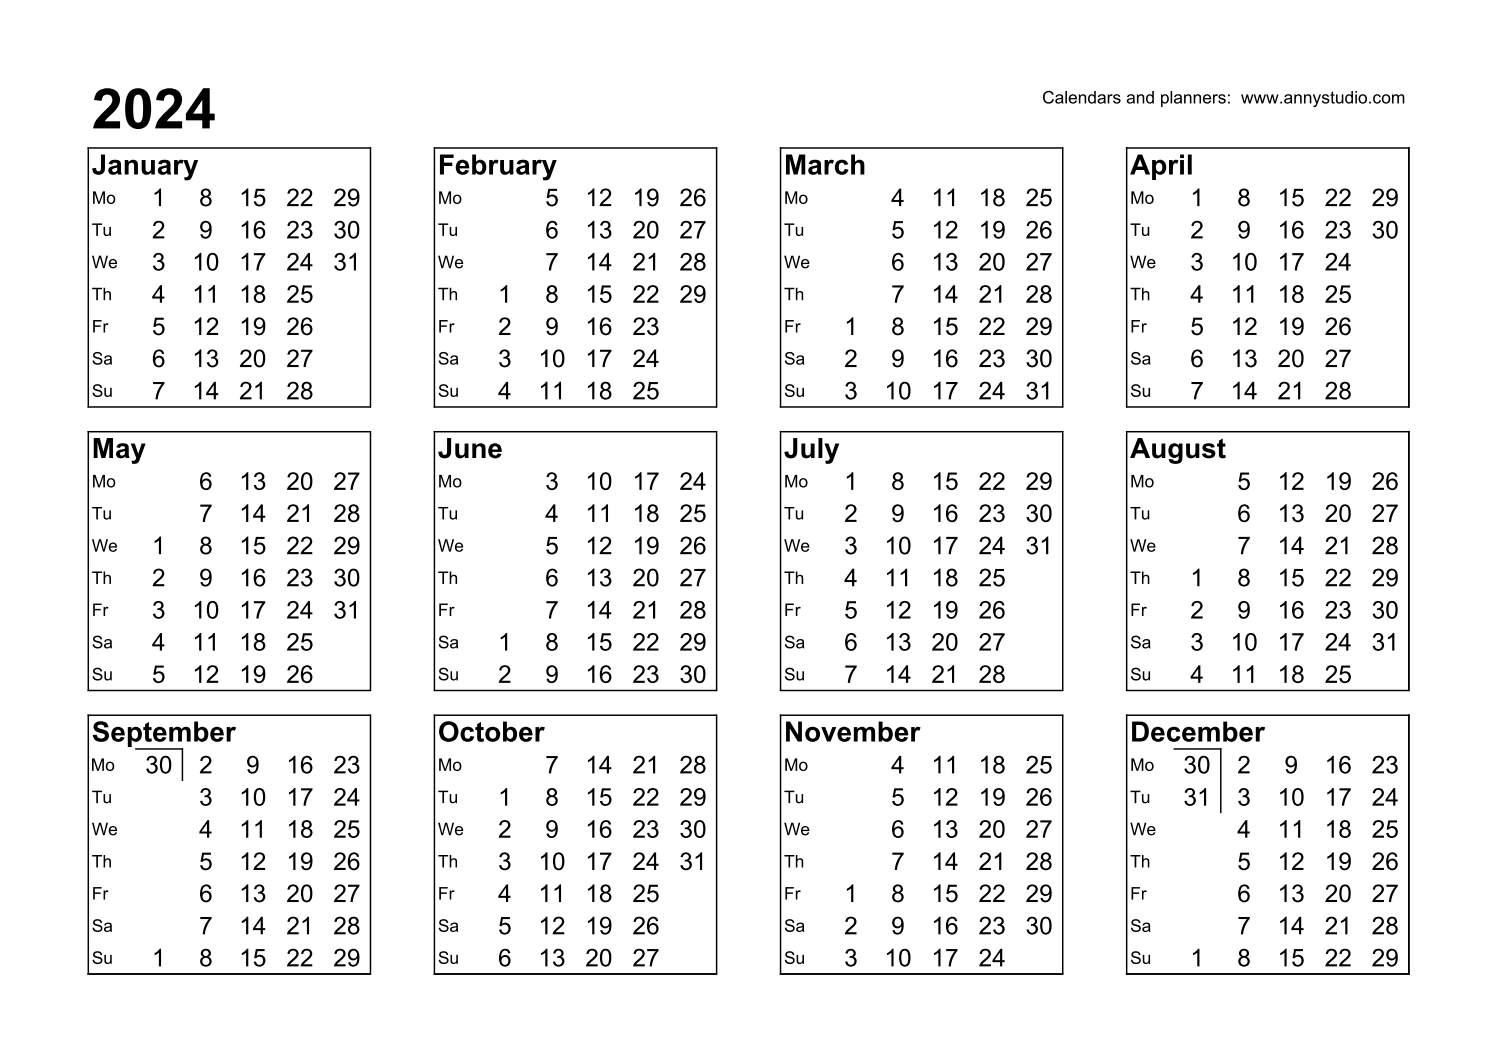 Free Printable Calendars And Planners 2024, 2025 And 2026 | Free Printable Calendar 2024 Nz